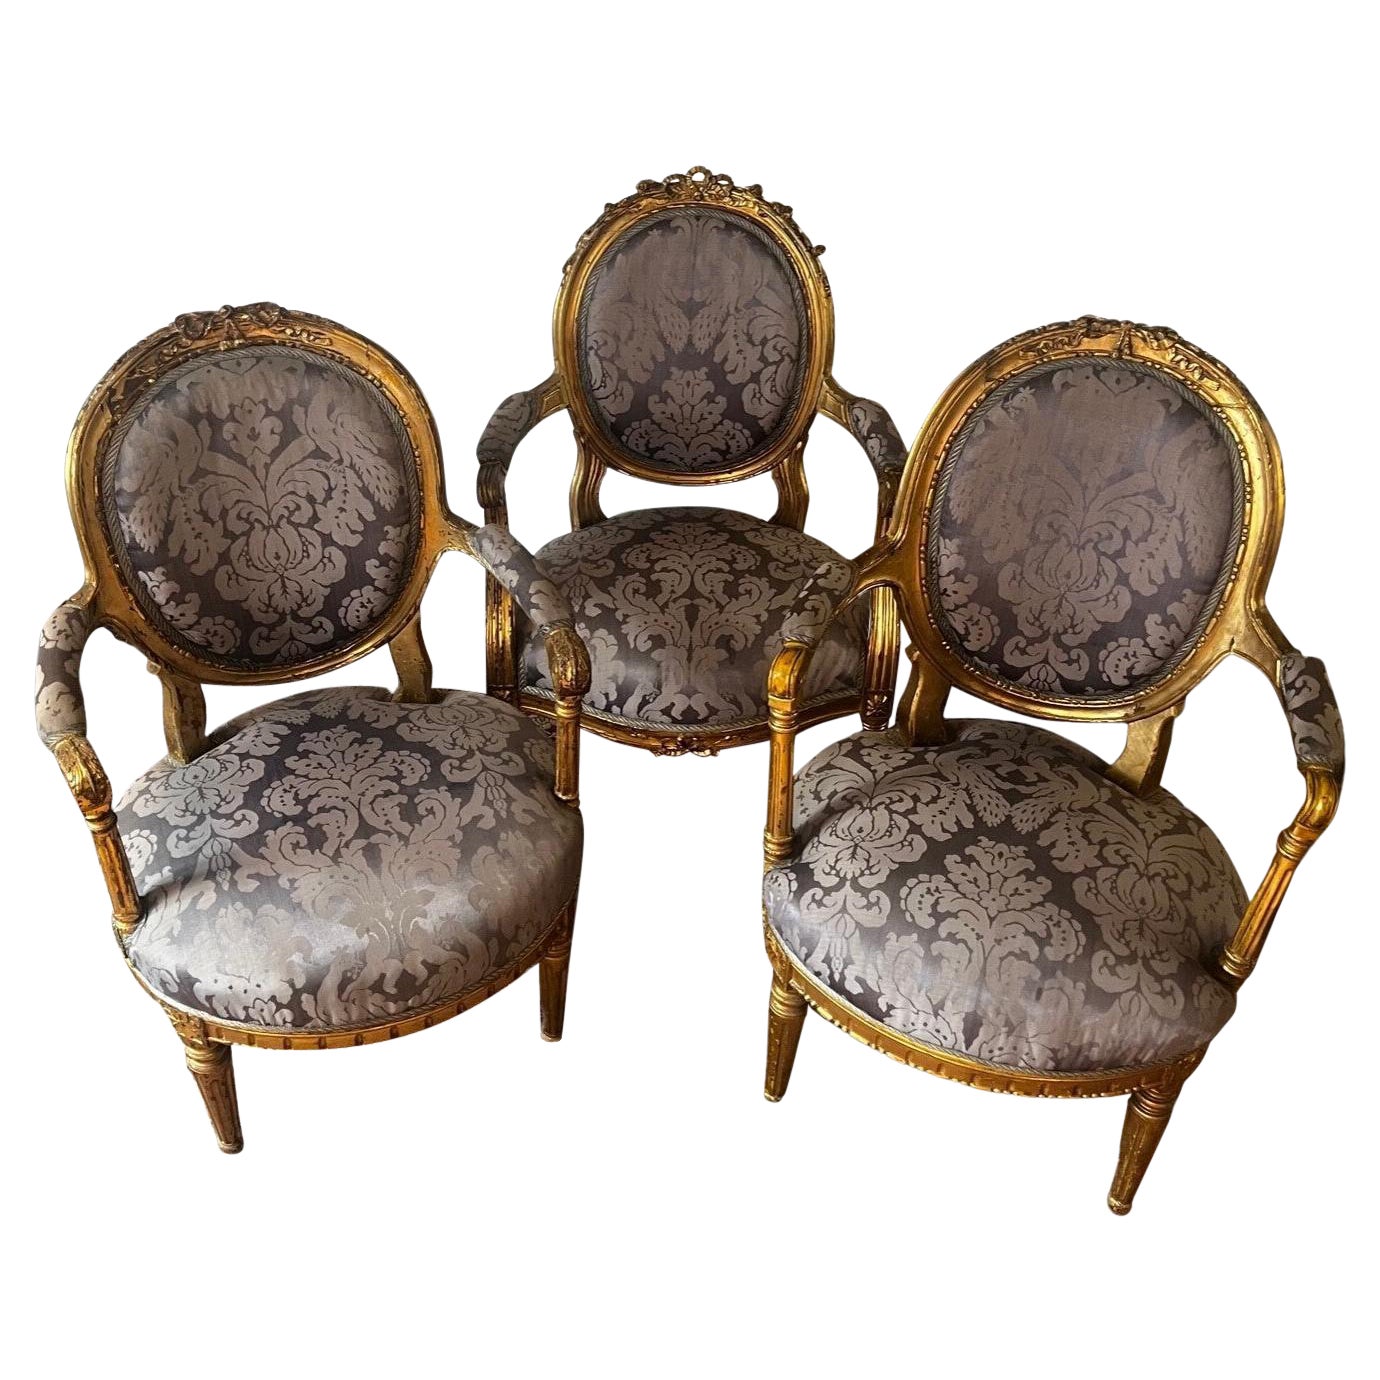 The Set of Three Original 18th Century Louis XVI Gold Gilded Armchairs For Sale